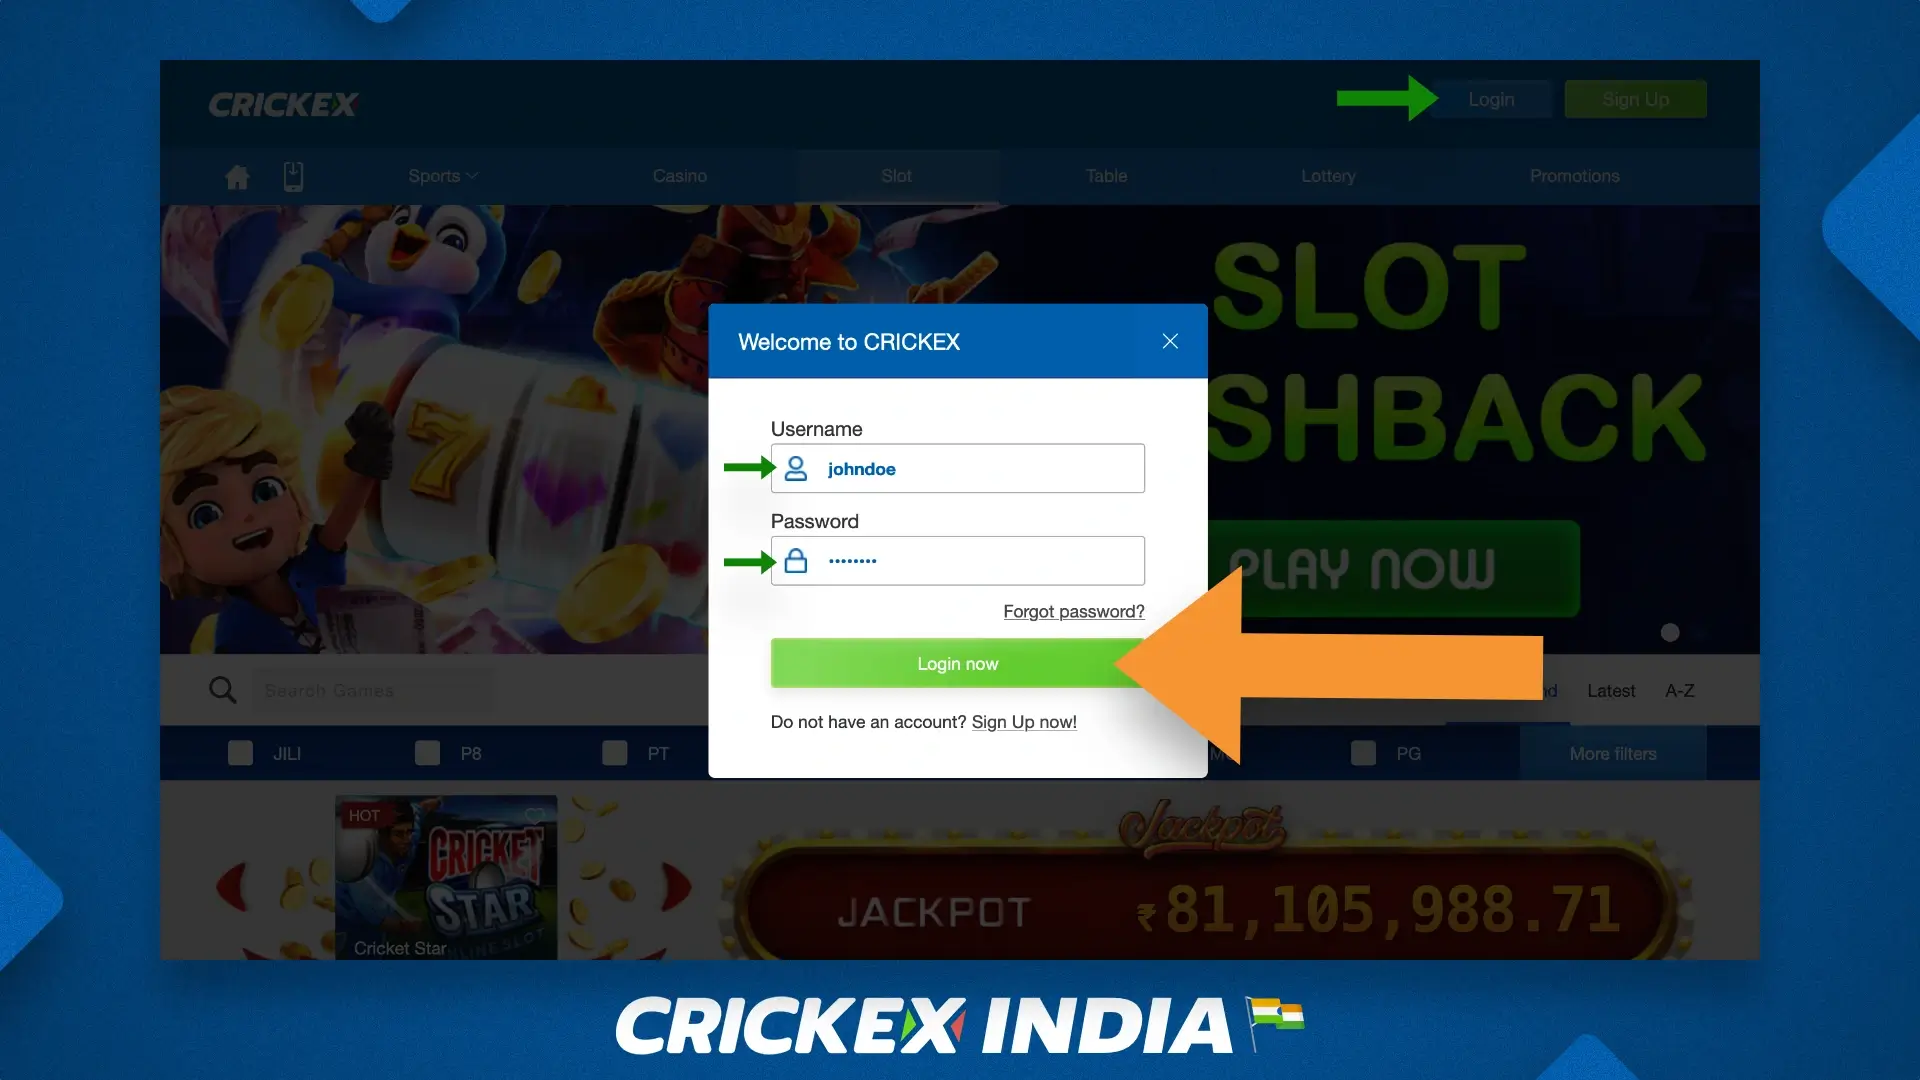 Sign in and log in to a personal account on the Crickex website